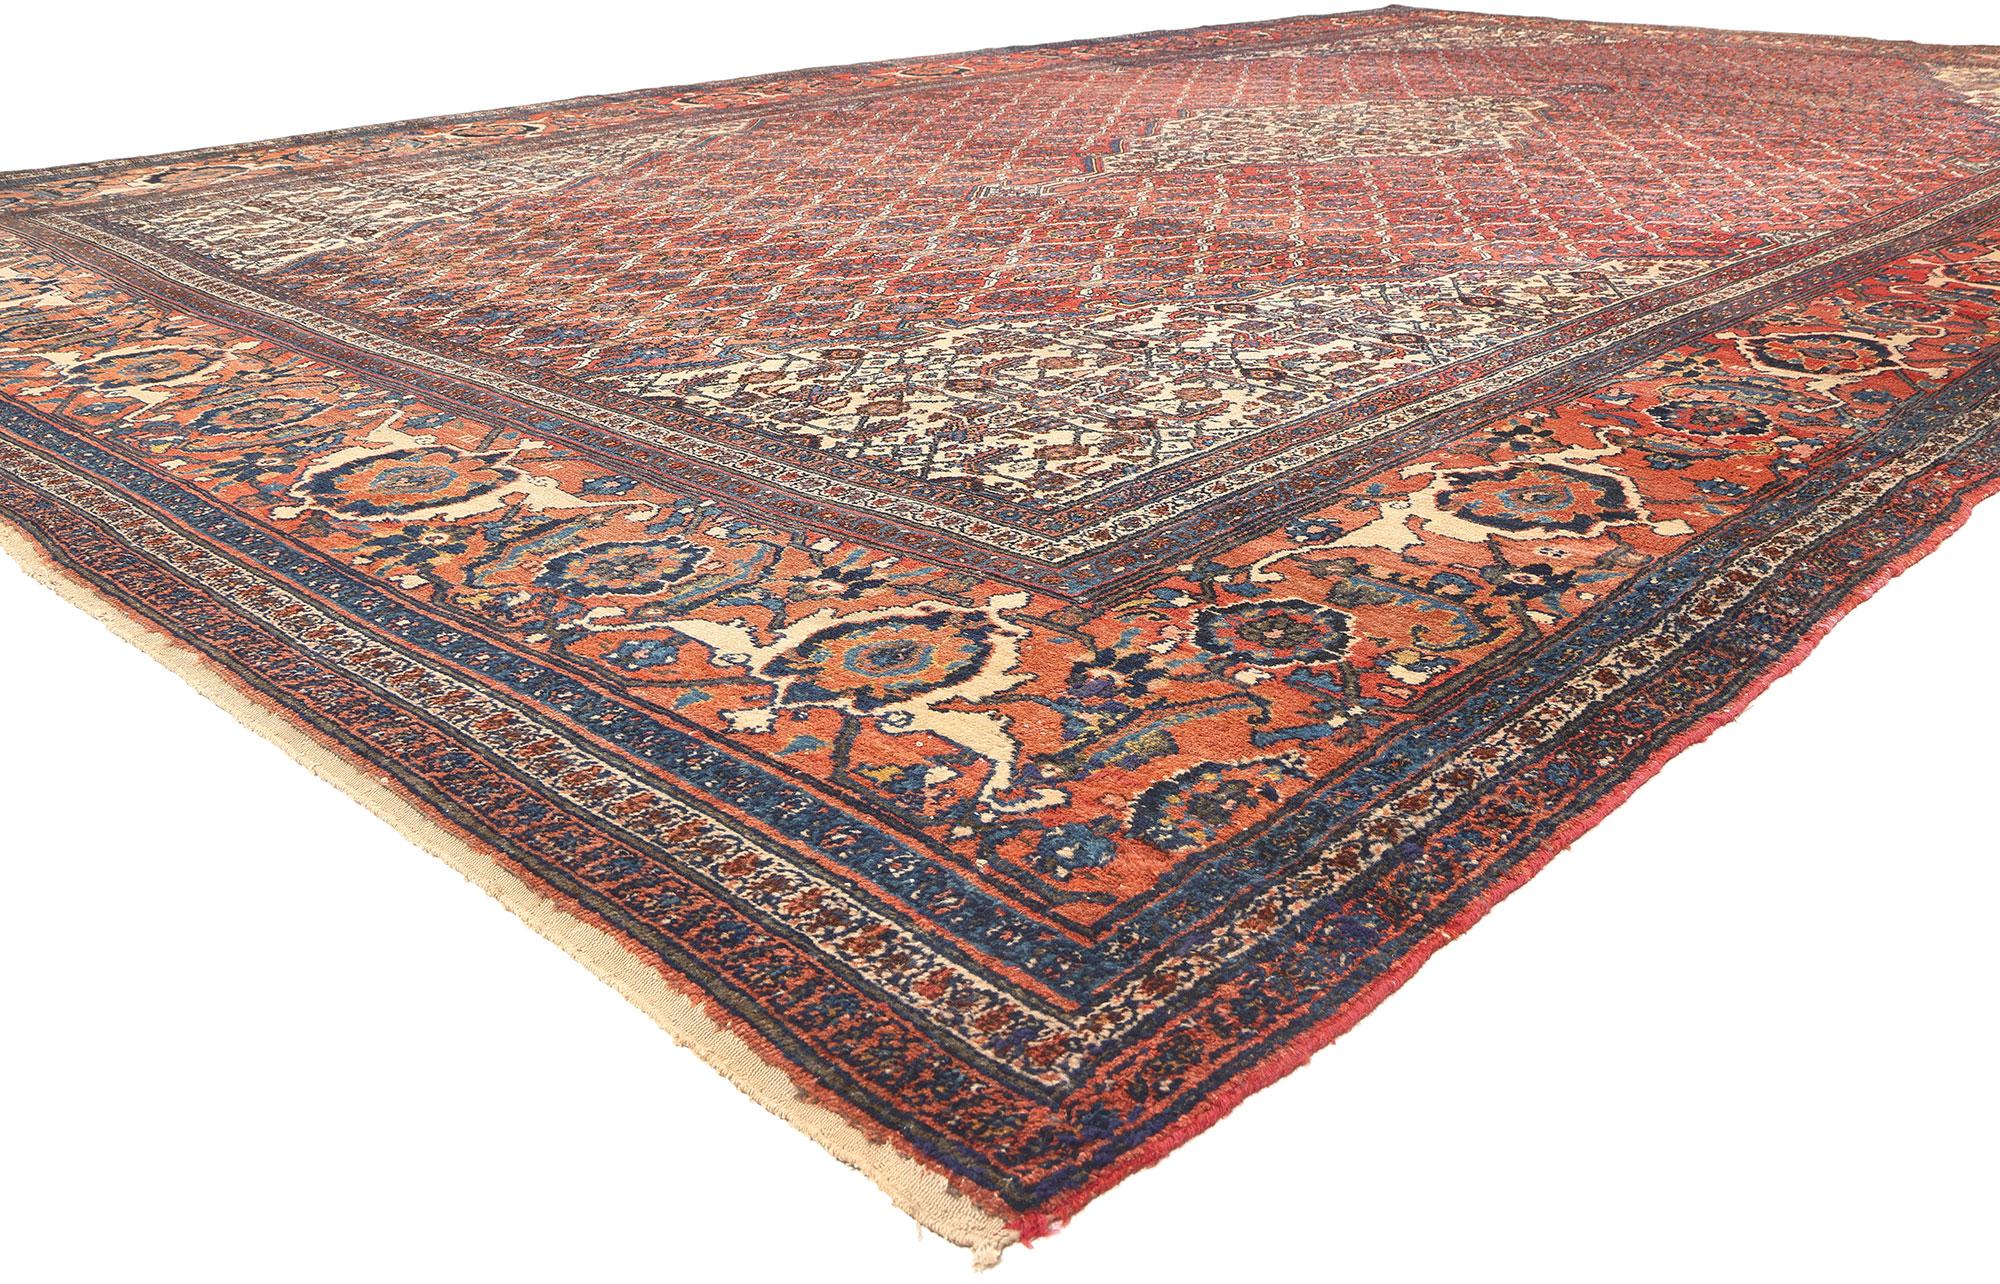 78091 Oversized Antique Persian Bibikabad Rug, 12'11 x 20'00. Step into the enchanting embrace of rustic elegance with this hand-knotted wool oversized antique Persian Bibikabad rug – an Adirondack-inspired wonder that effortlessly blends ornate